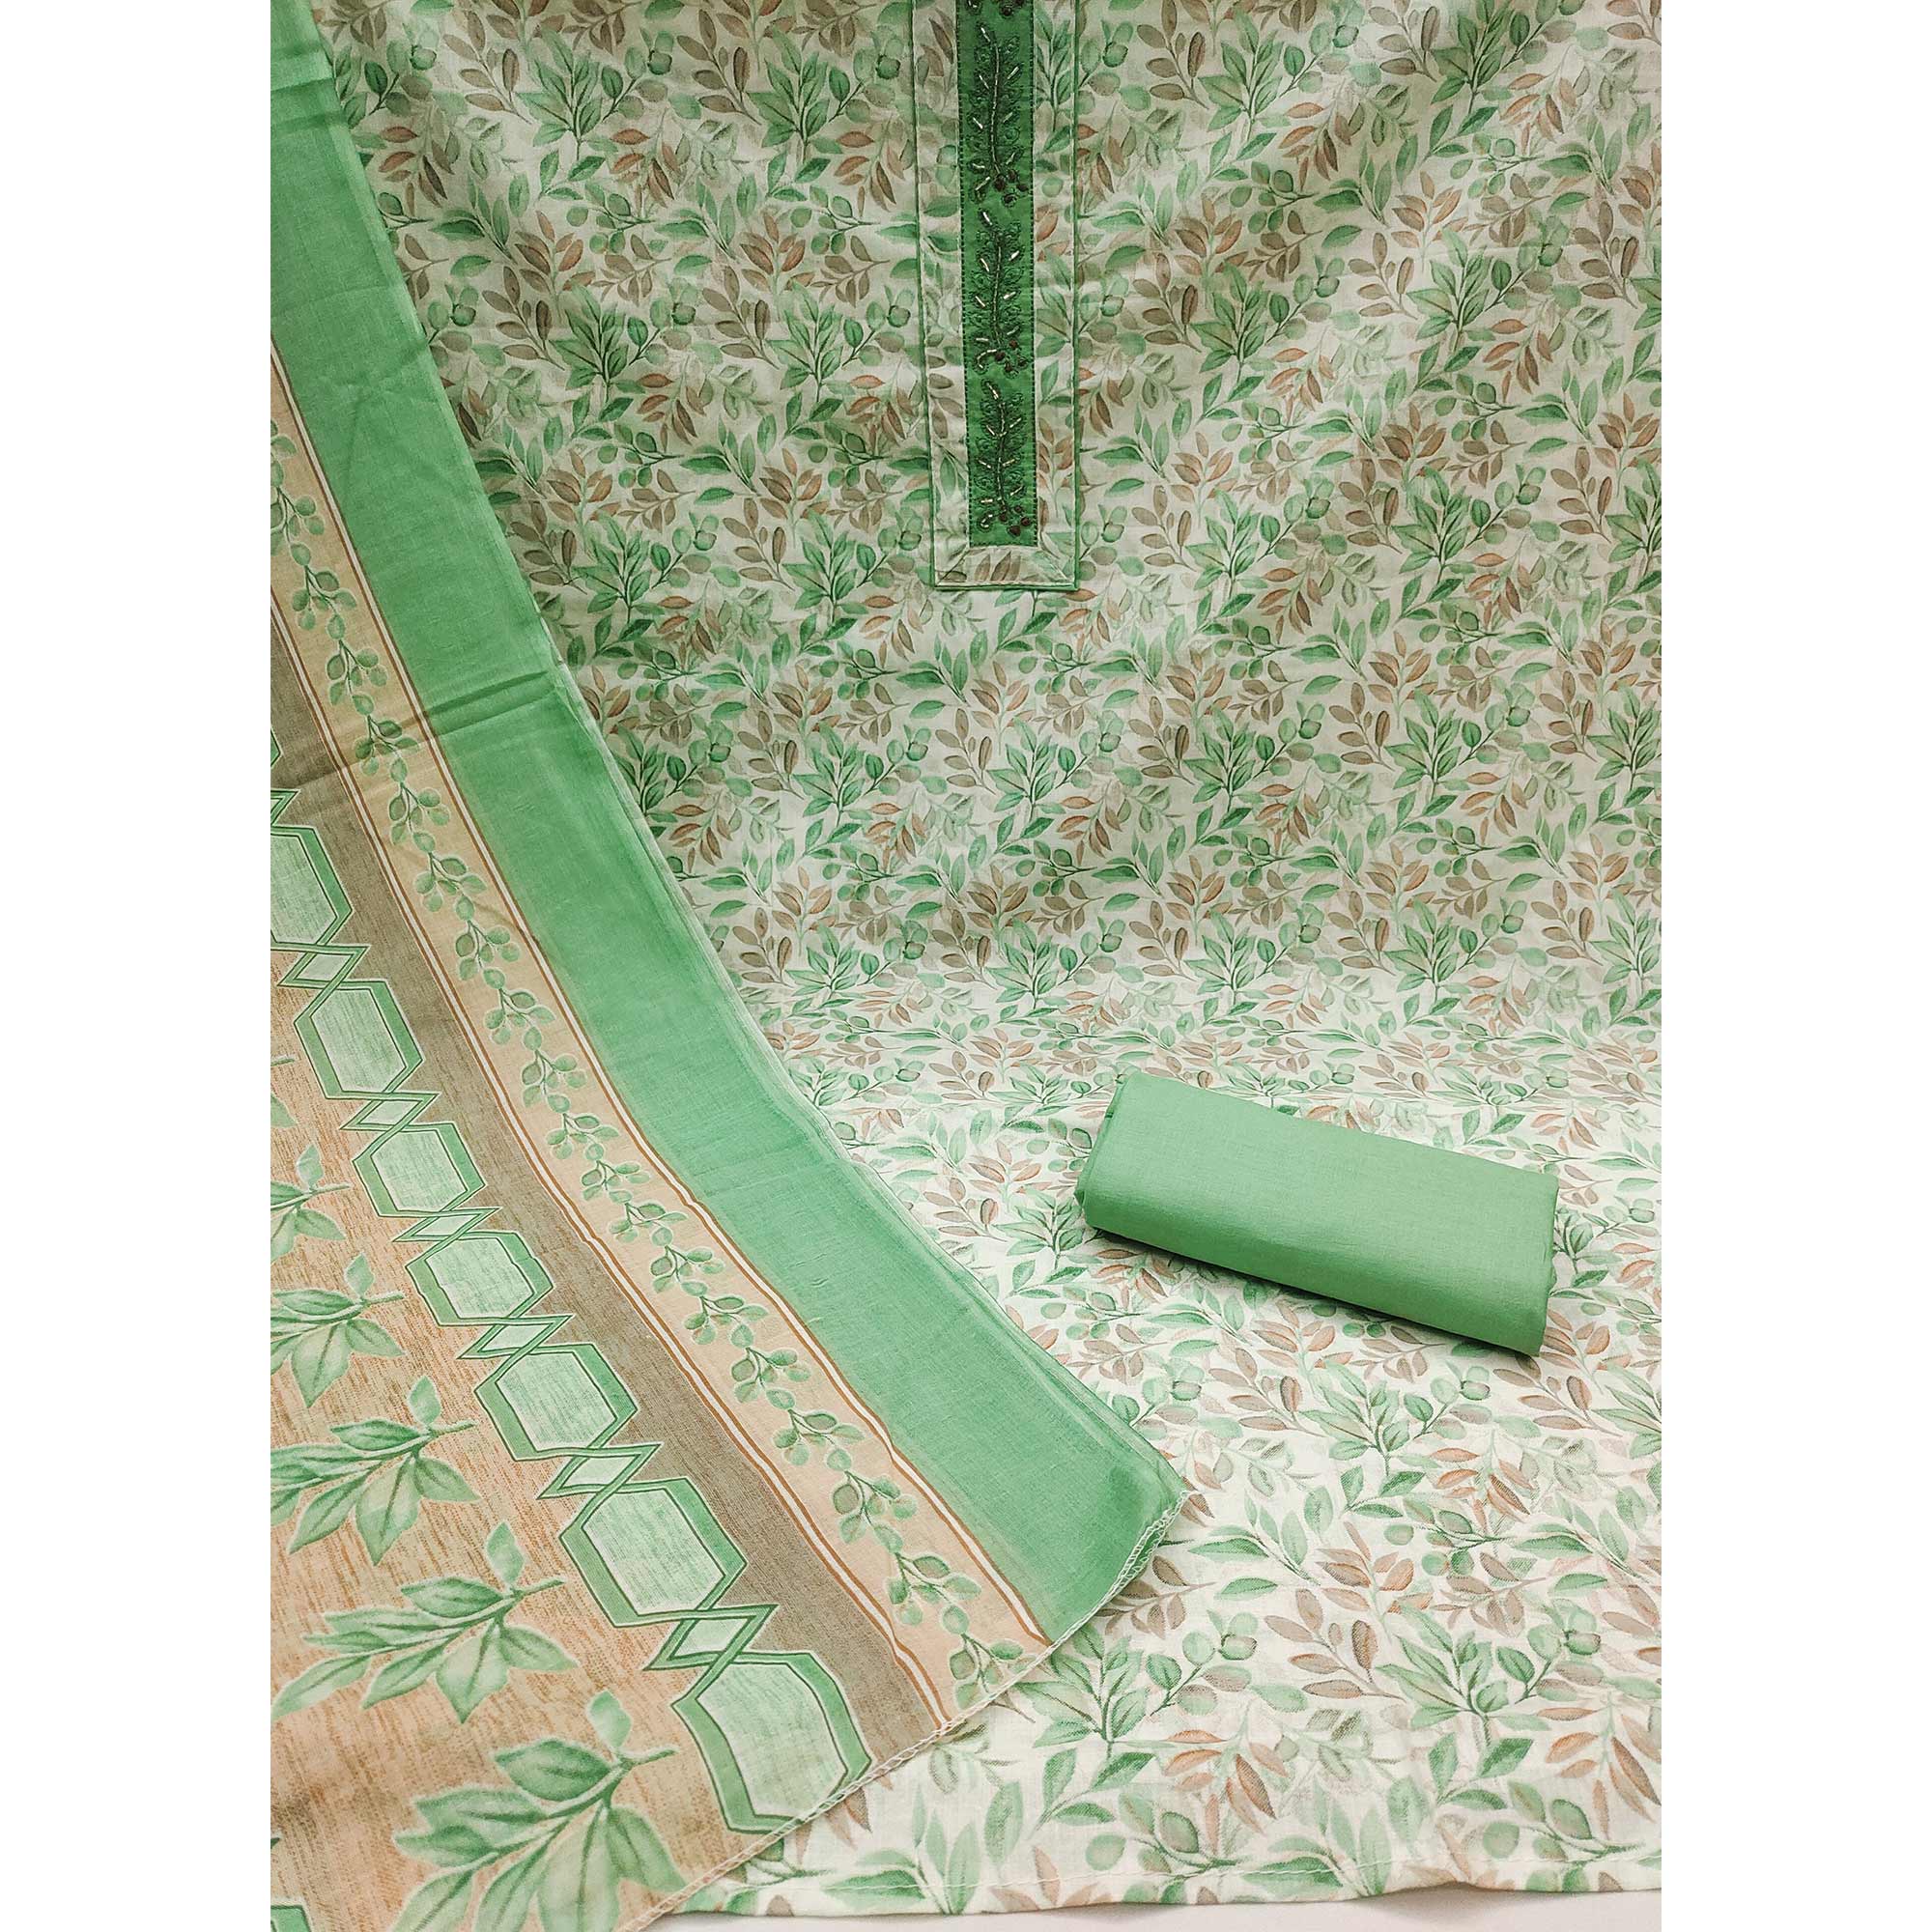 Green Floral Printed Pure Cotton Dress Material